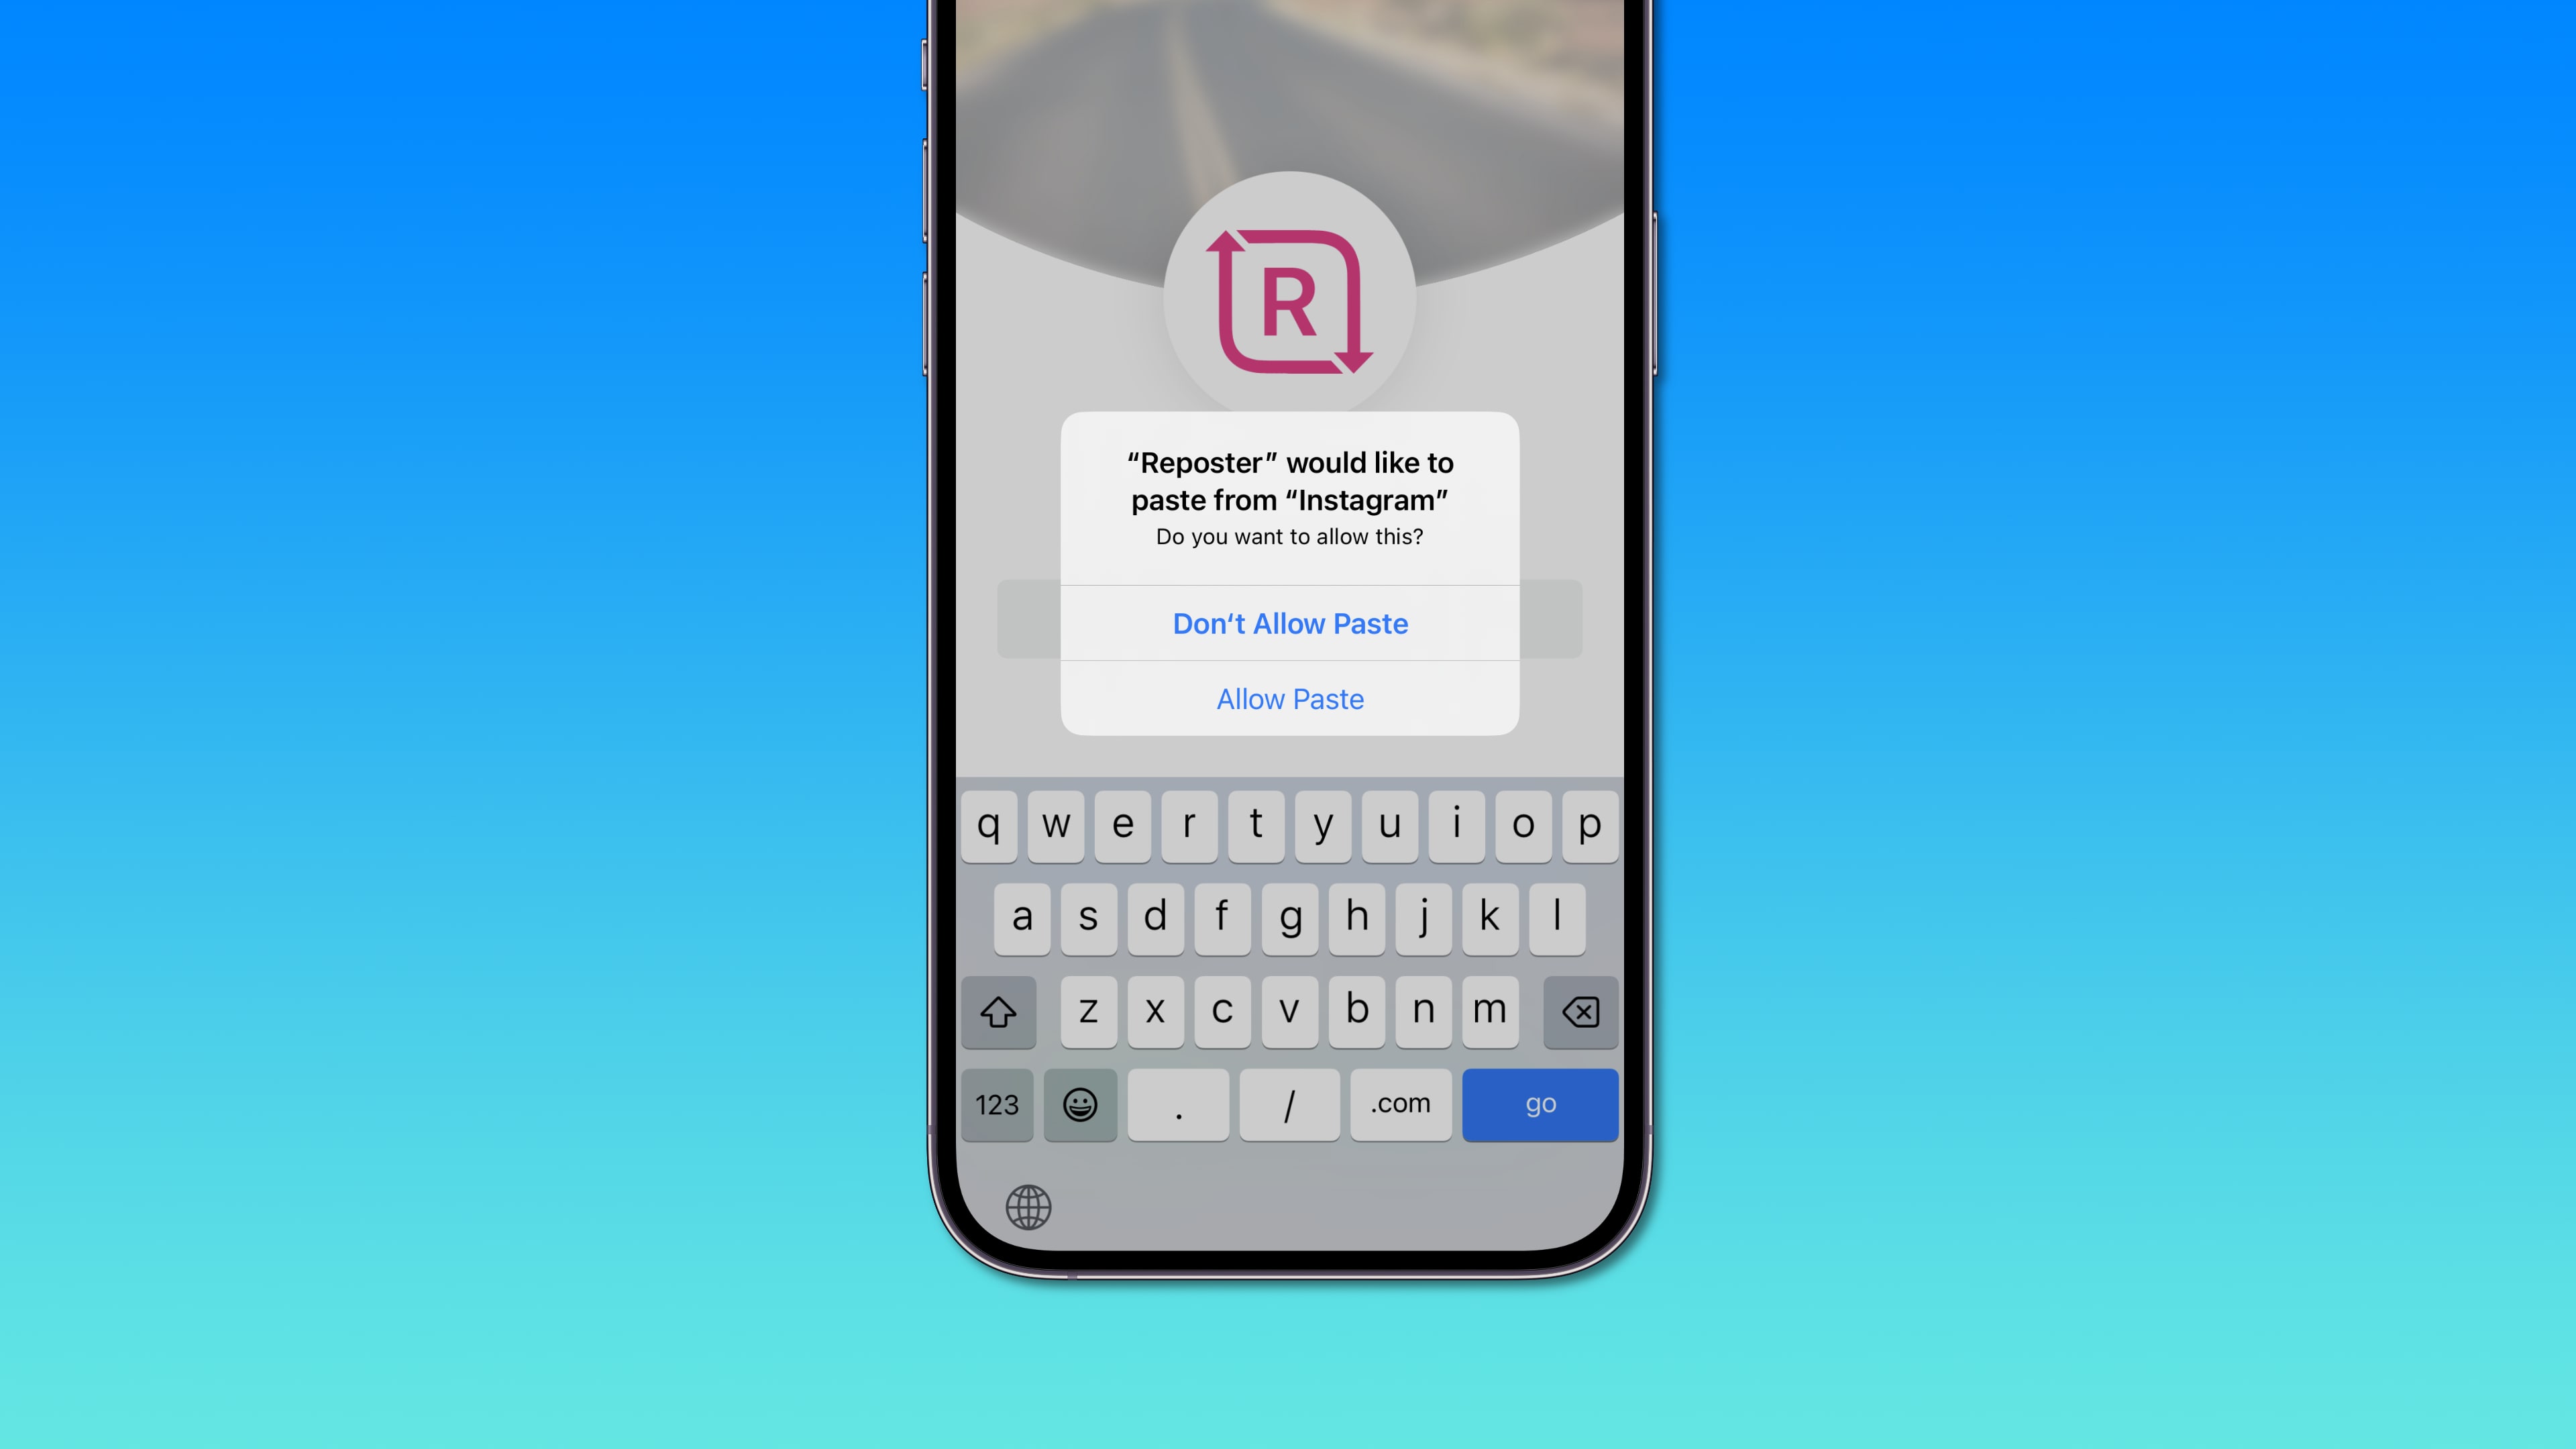 iOS 16's excessive clipboard paste permission prompt in the Reposter app on iPhone